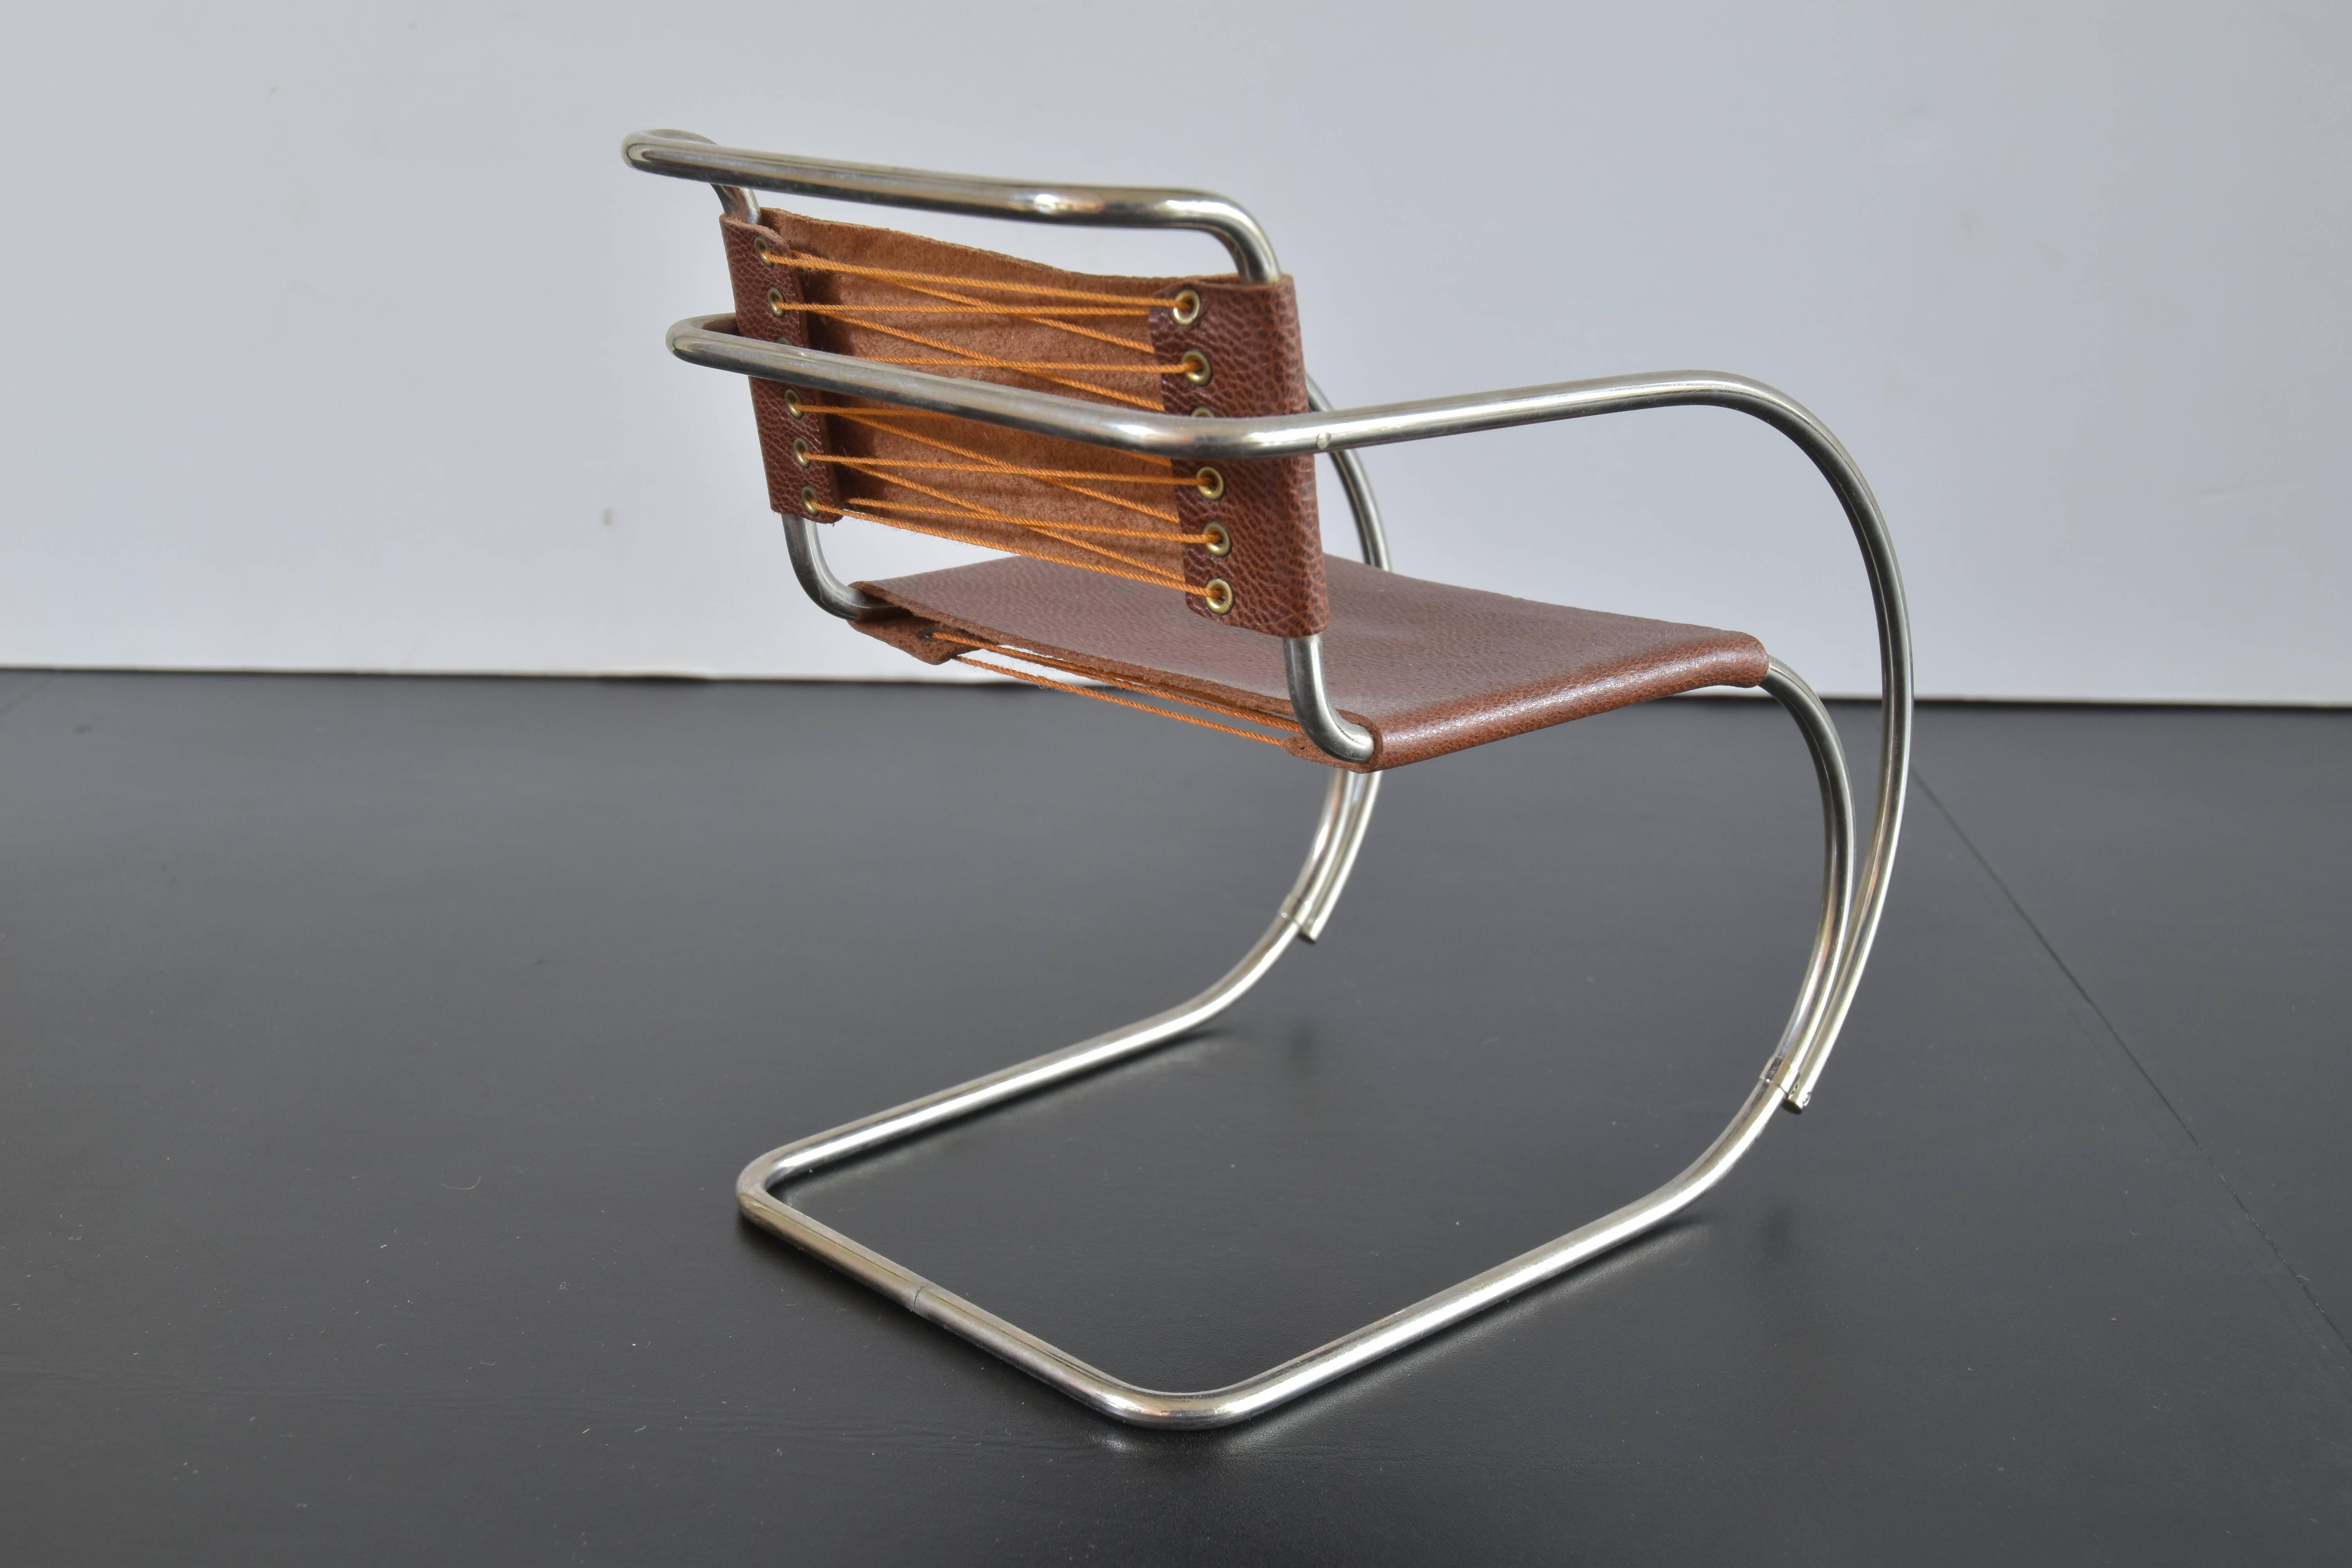 A Vita design museum miniature model of the Ludwig Mies van der Rohe MR 20 chair from the original produced in 1927.

This miniature model includes the historical narrative brochure and wooden box.
 